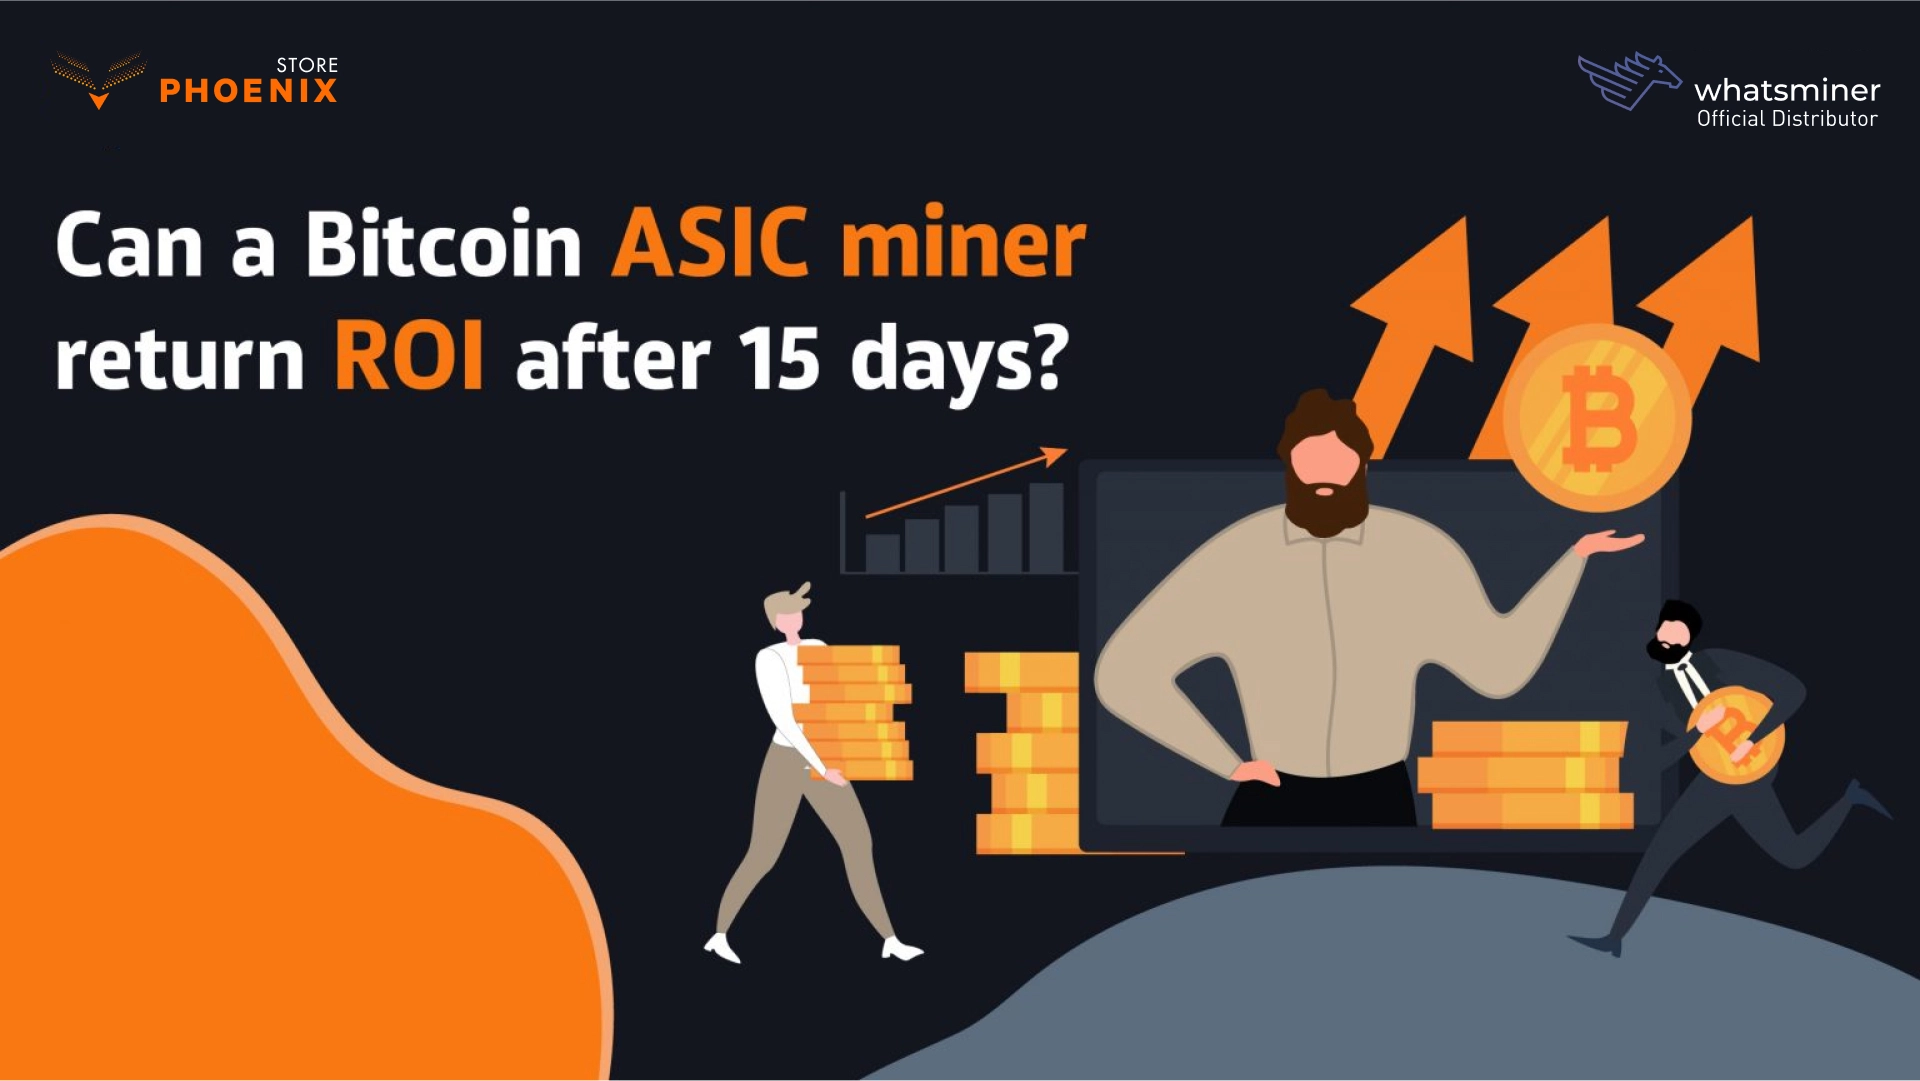 Can a Bitcoin ASIC miner return ROI after 15 days?